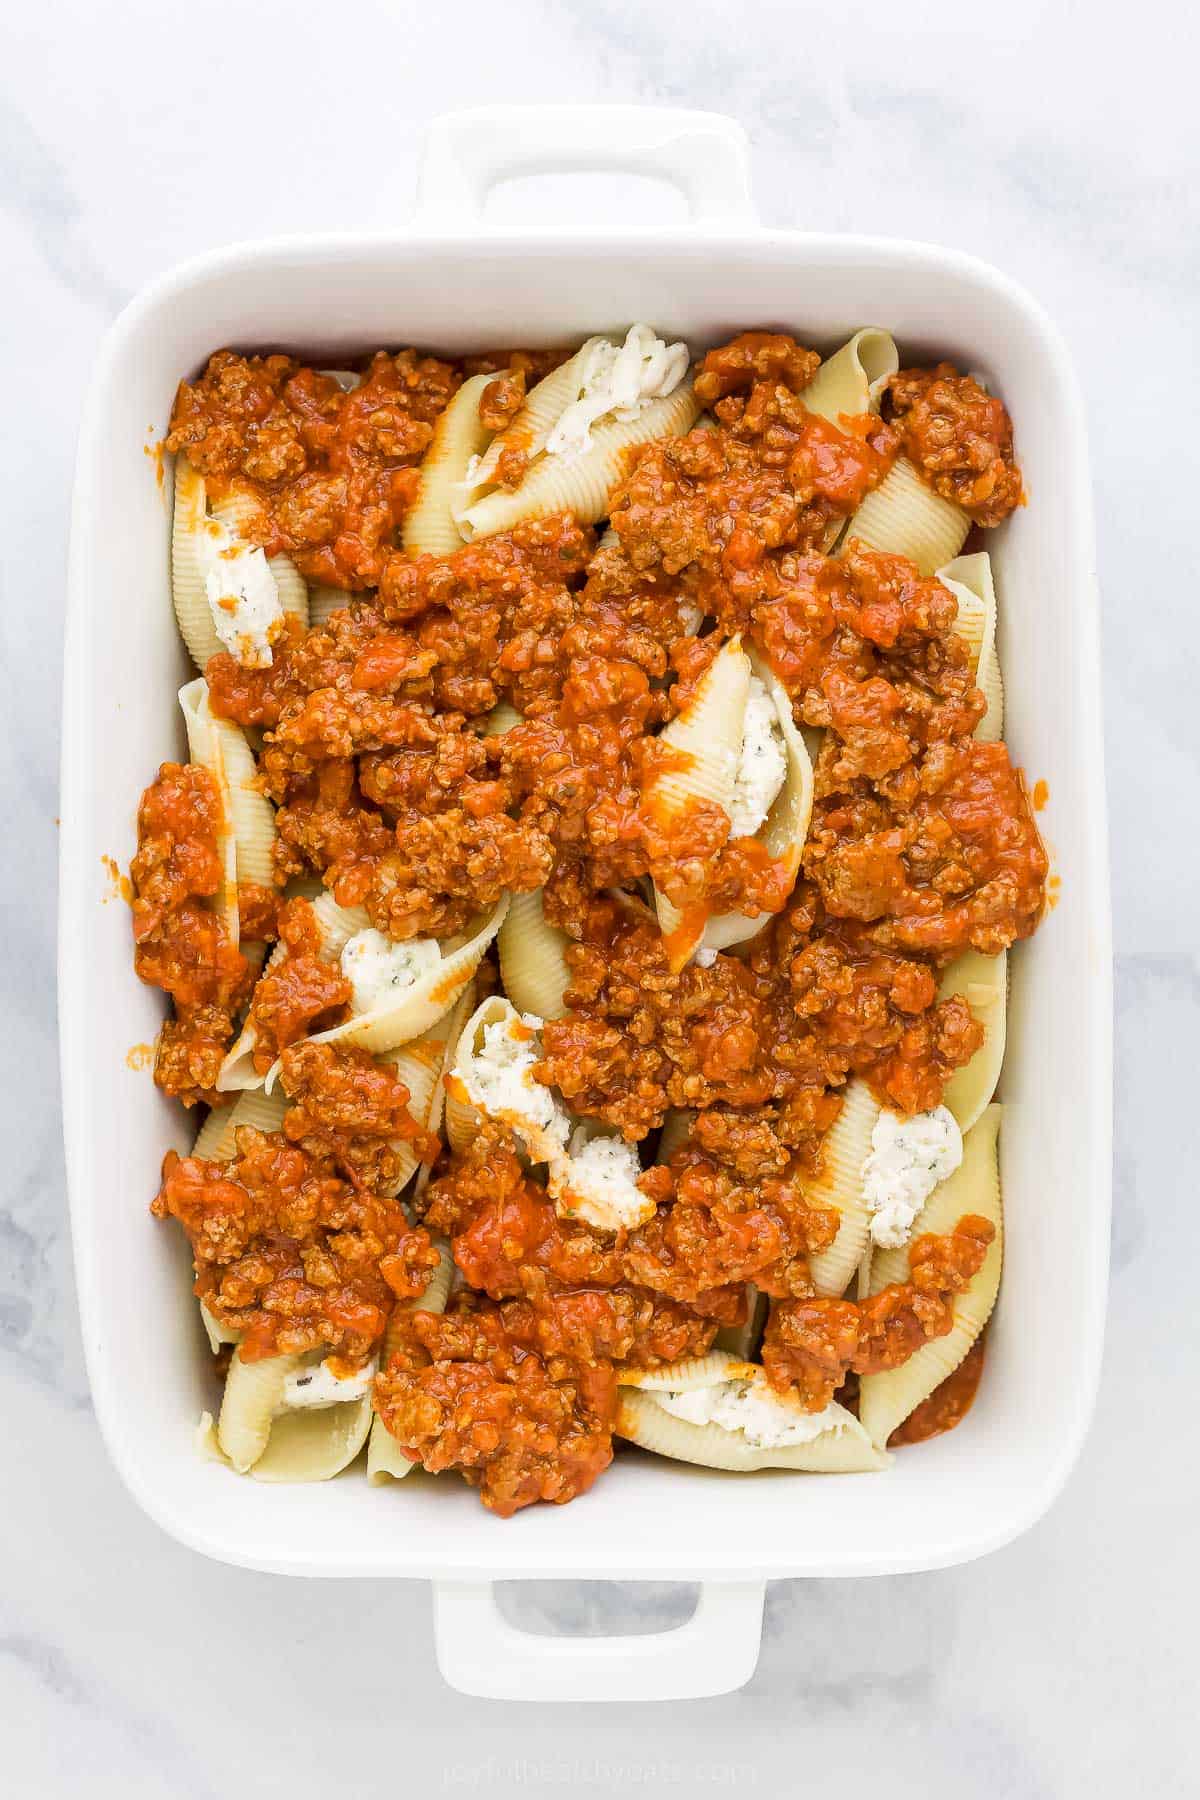 A layer of stuffed shells sandwiched between two layers of homemade Ragu in a casserole dish